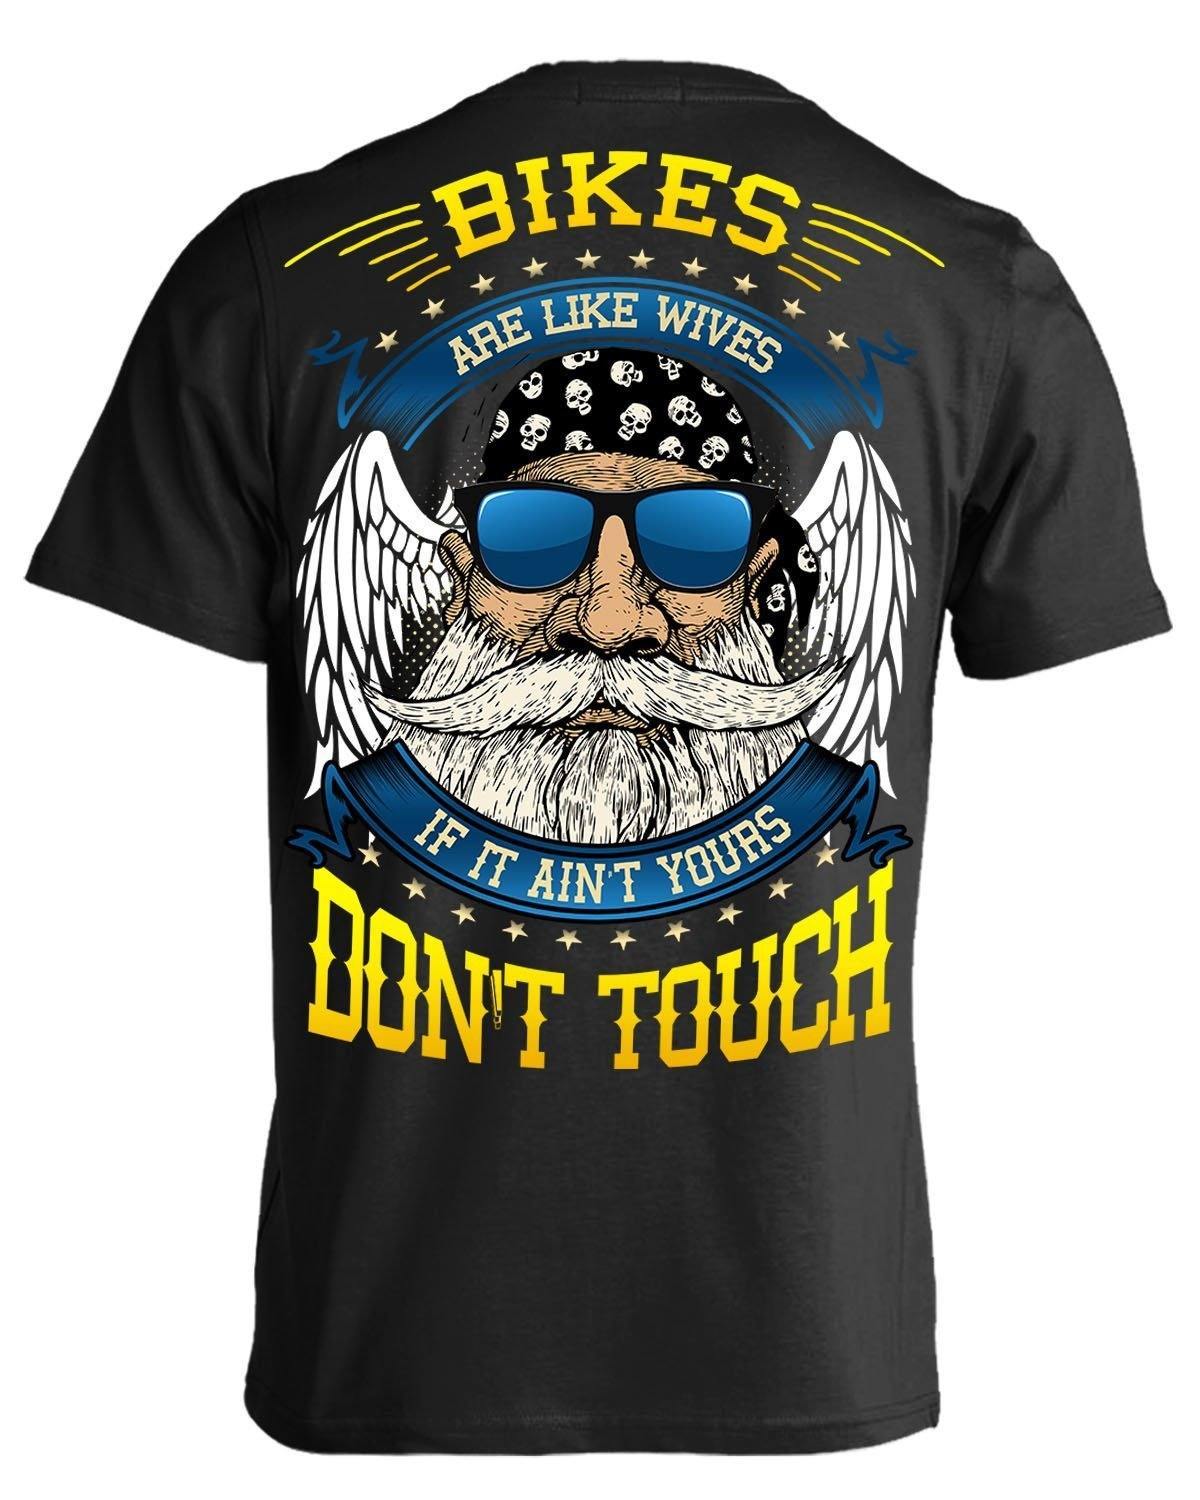 Bikes Are Like Wives, If It Ain’t Yours Don’t Touch T-Shirt - American Legend Rider